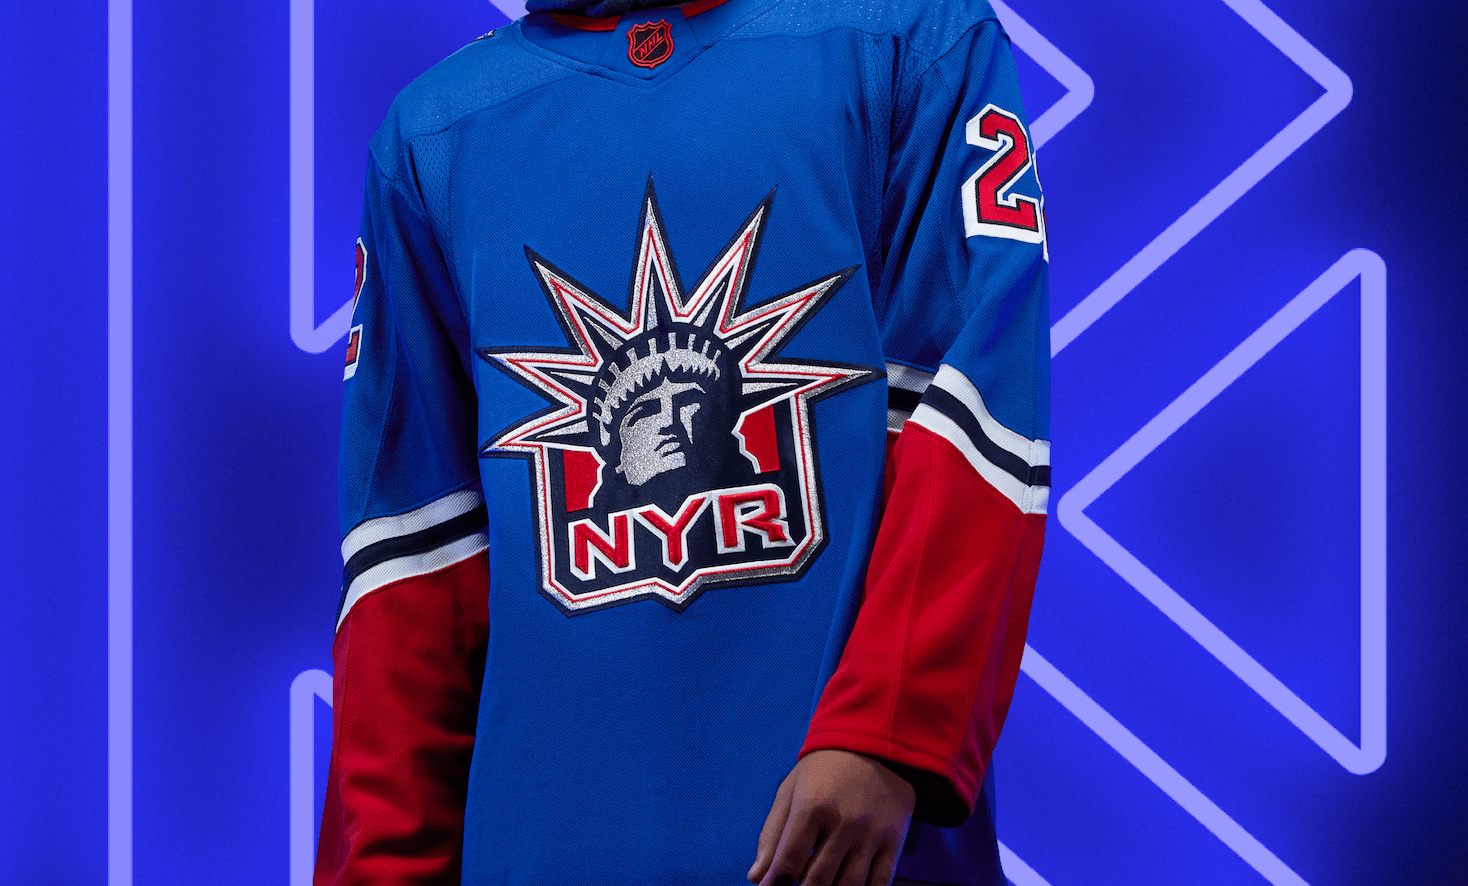 Many of our jerseys reenergize classic logos like the “Lady Liberty” you see on this year’s Rangers edition. This time, she’s back with an exciting twist in the new red color-blocking and navy stripes.